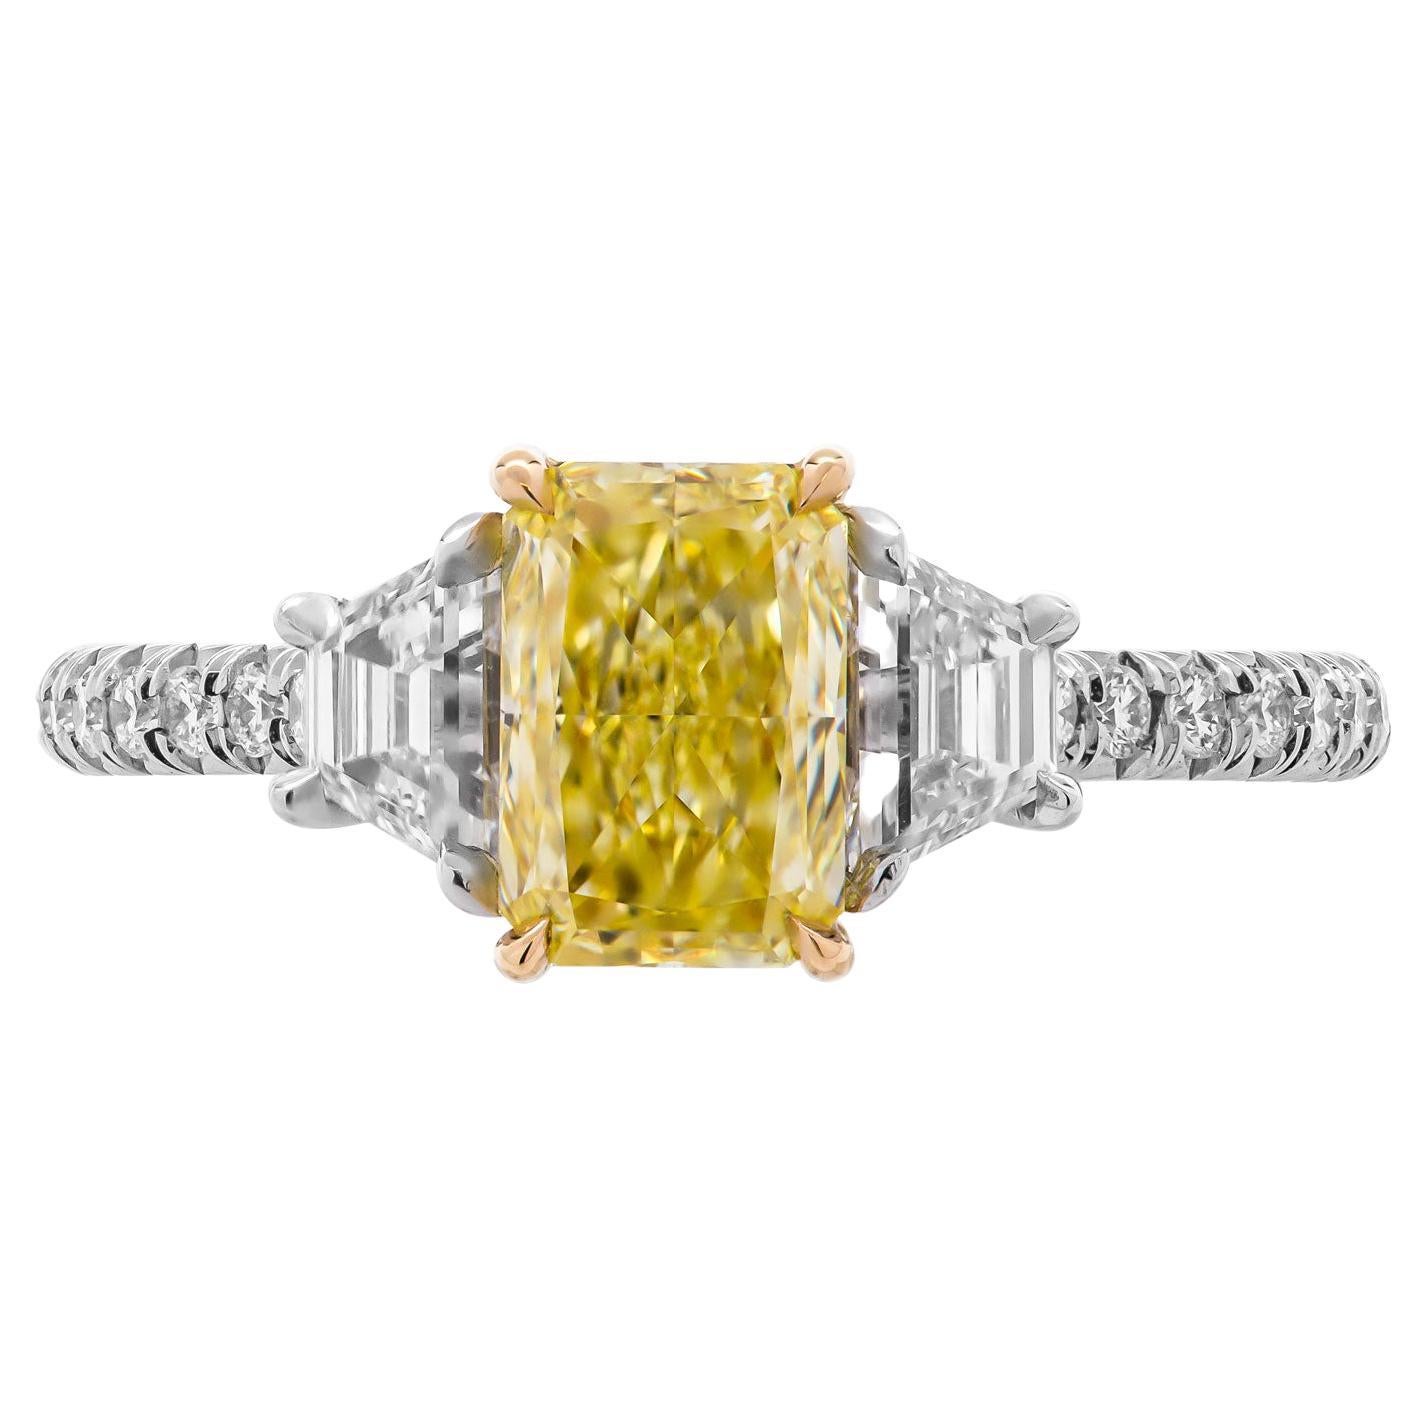 Mounted in handmade custom design setting featuring Platinum 950 & 18K Yellow Gold with pave on the shank Setting features exceptional pave work, delicate yet sturdy, includes approximately 0.26ct of small full brilliant cut diamonds.
 Side stones